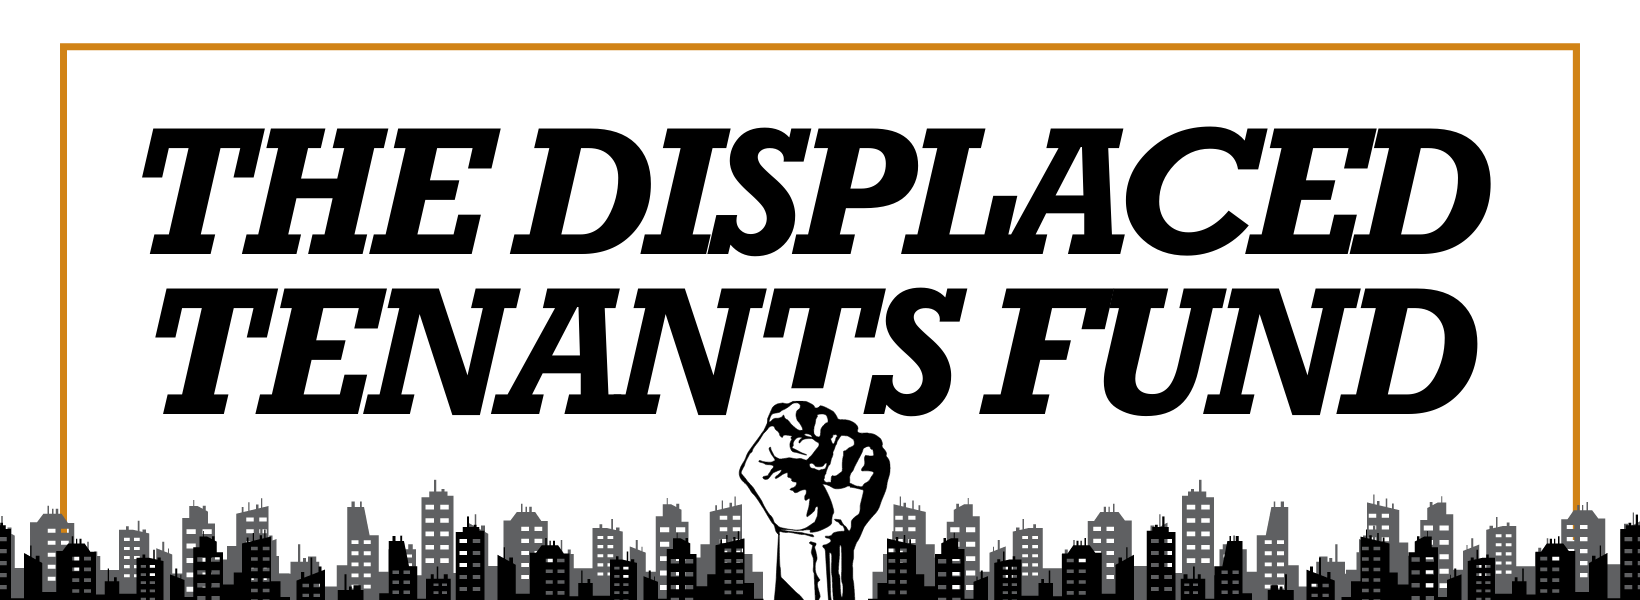 Rectangular banner with white background. Across the bottom is a cartoon silhouette of a city skyline with a fist raised in protest in the center. Black text reads The Displaced Tenants Fund